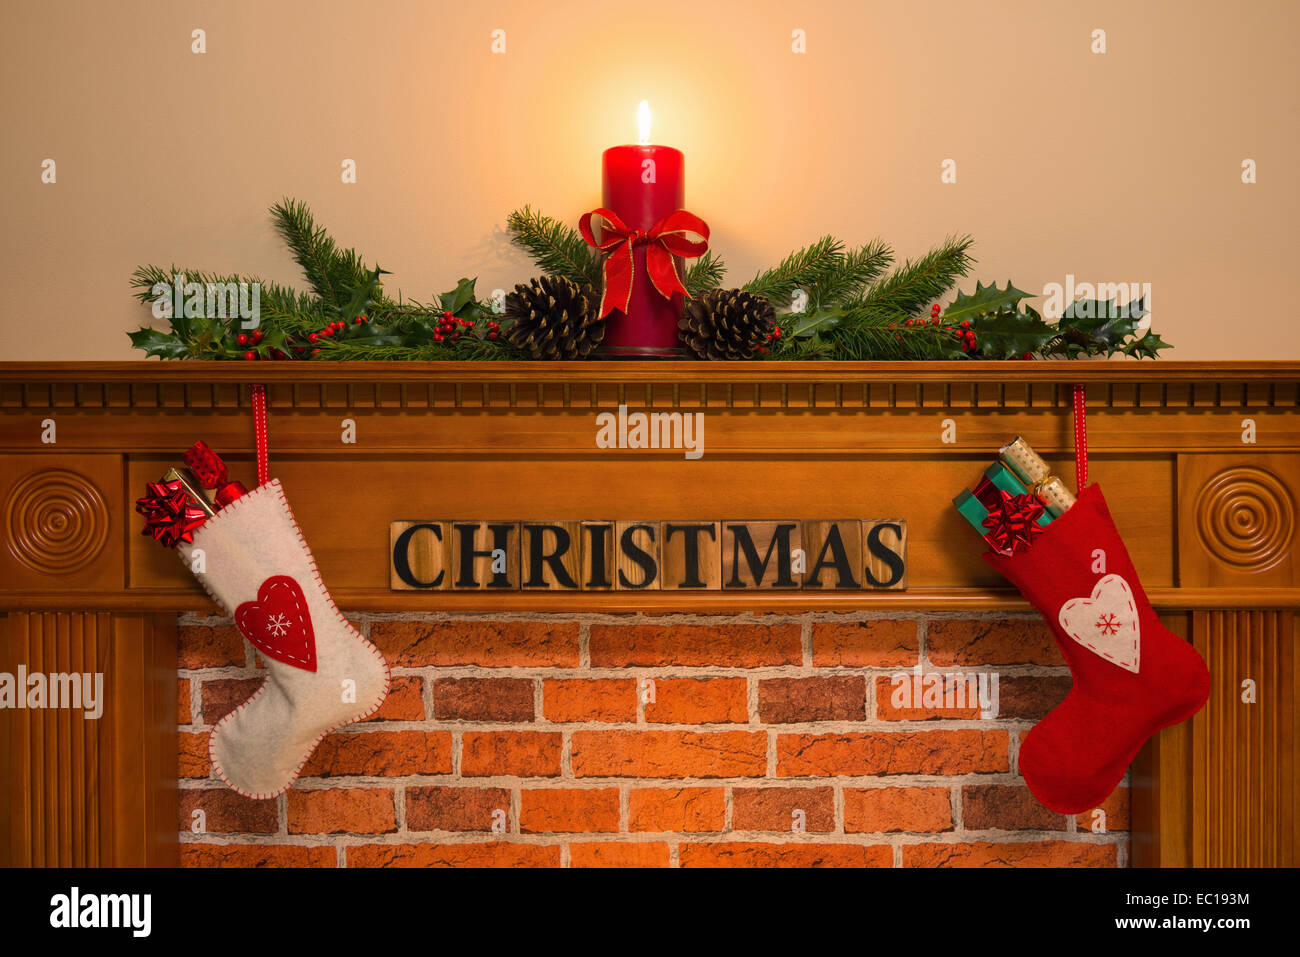 Mantelpiece with red candle and fresh garland made from holly, two stockings full of gifts hanging over the fireplace with the w Stock Photo